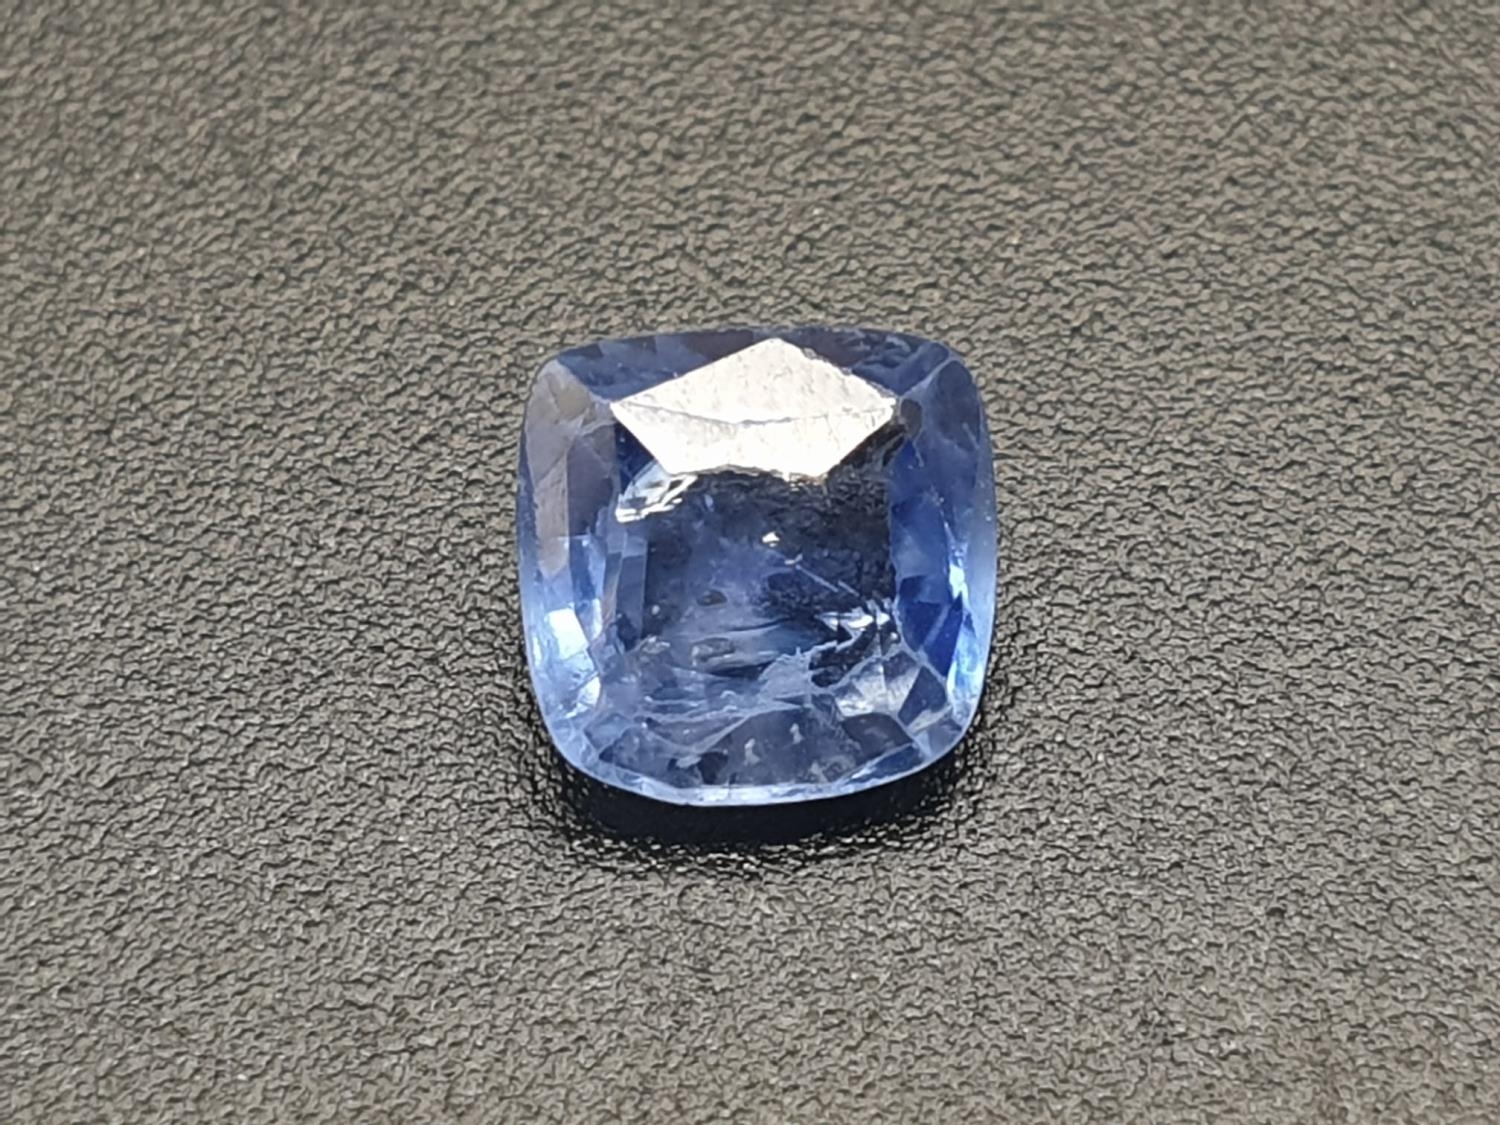 1.25ct cushion cut blue sapphire gemstone comes with original AnchorCert report and Safeguard